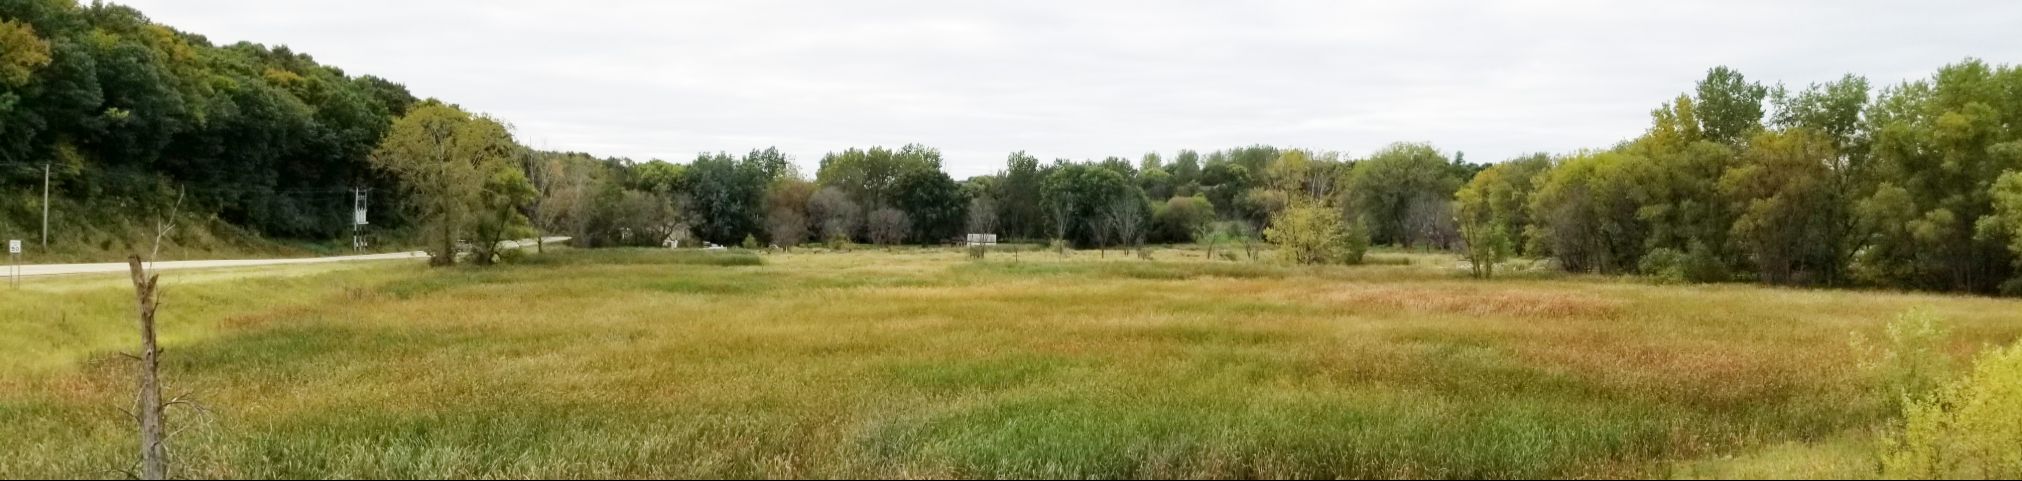 The project site before restoration (fall 2019).